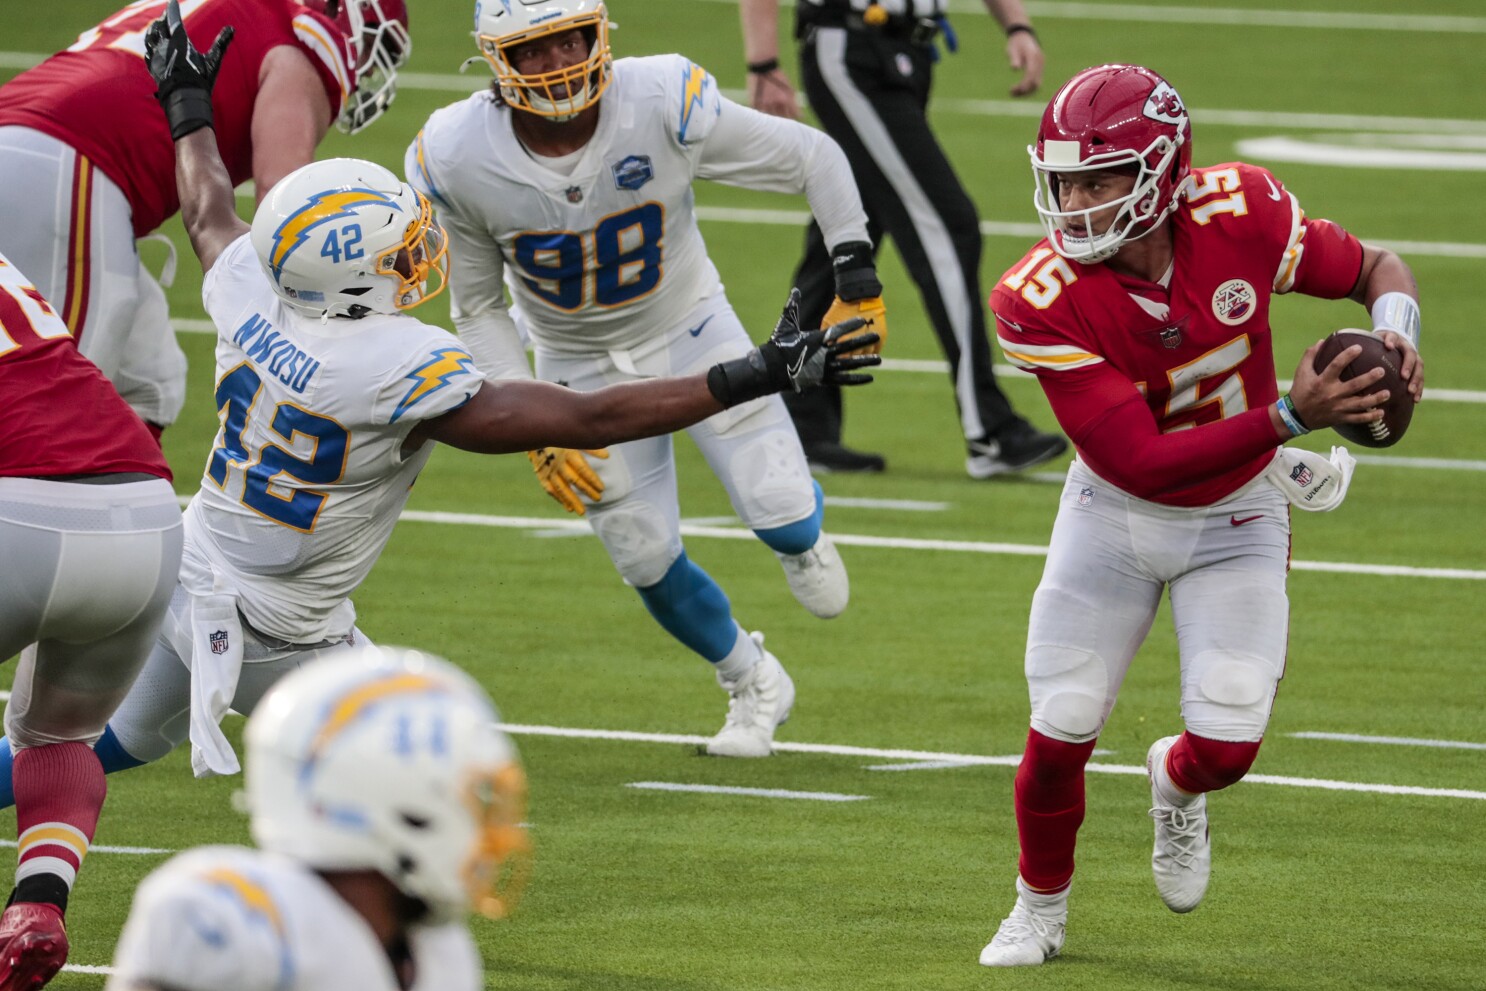 Patrick Mahomes The Difference As Chiefs Rally Past Chargers The San Diego Union Tribune